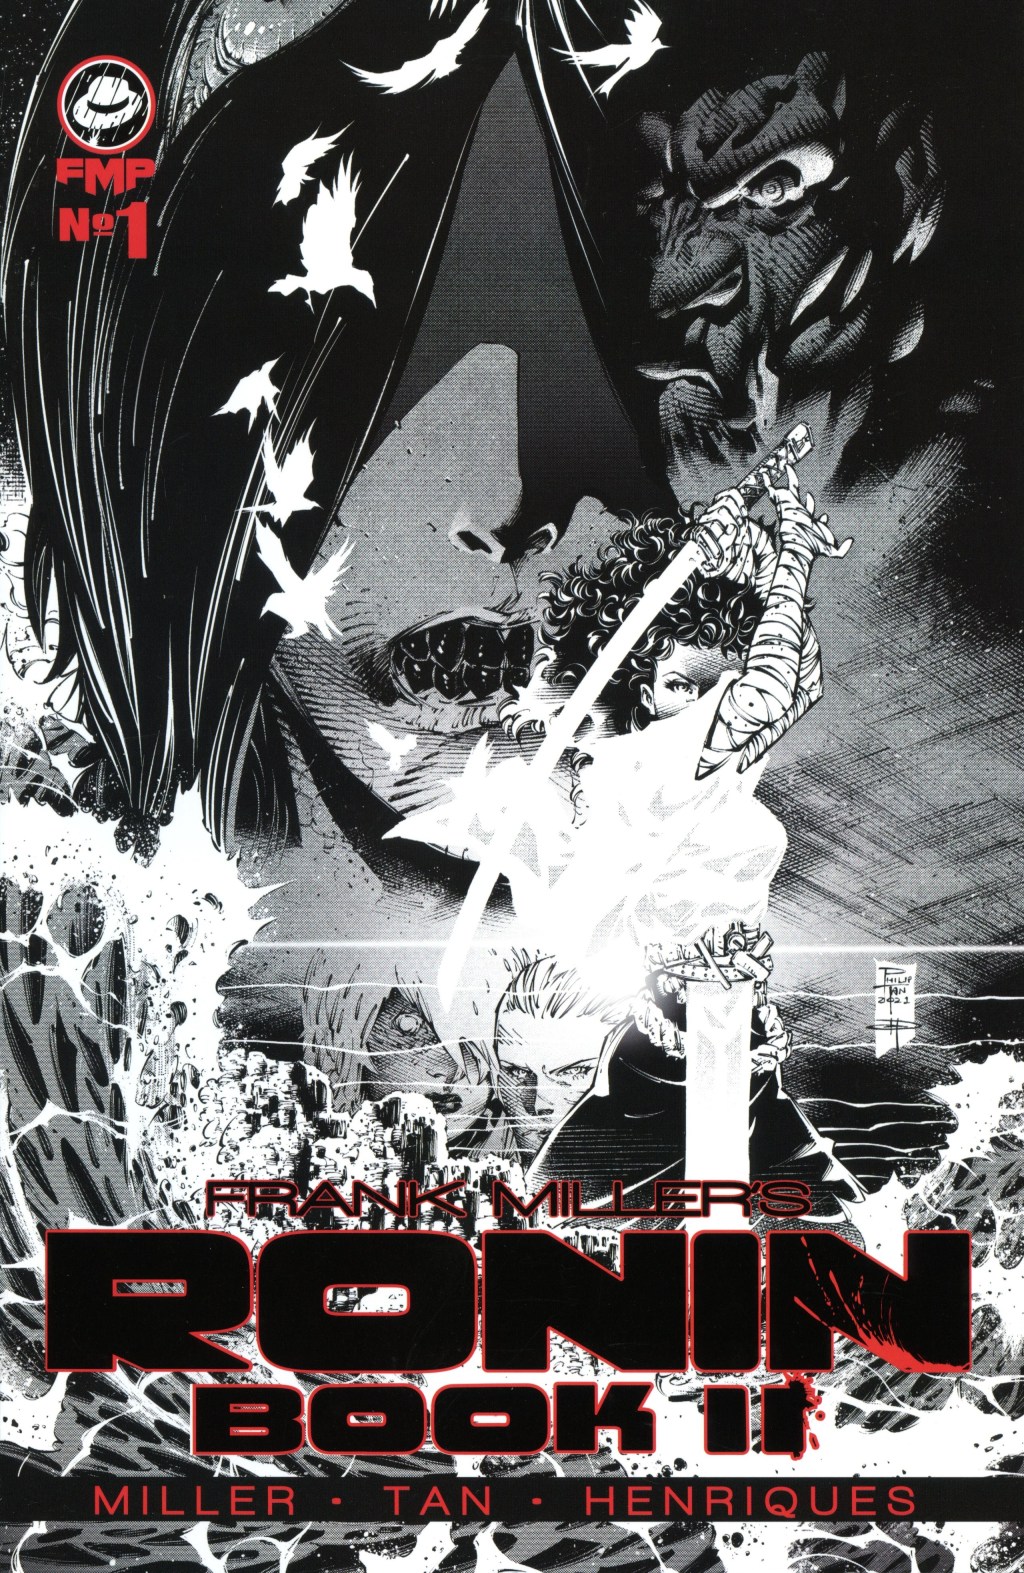 Ronin: Book II Issue #1 (2023), Frank Miller Presents. Words by Frank Miller. Art by Frank Miller, Phillip Tan, and Daniel Henriques